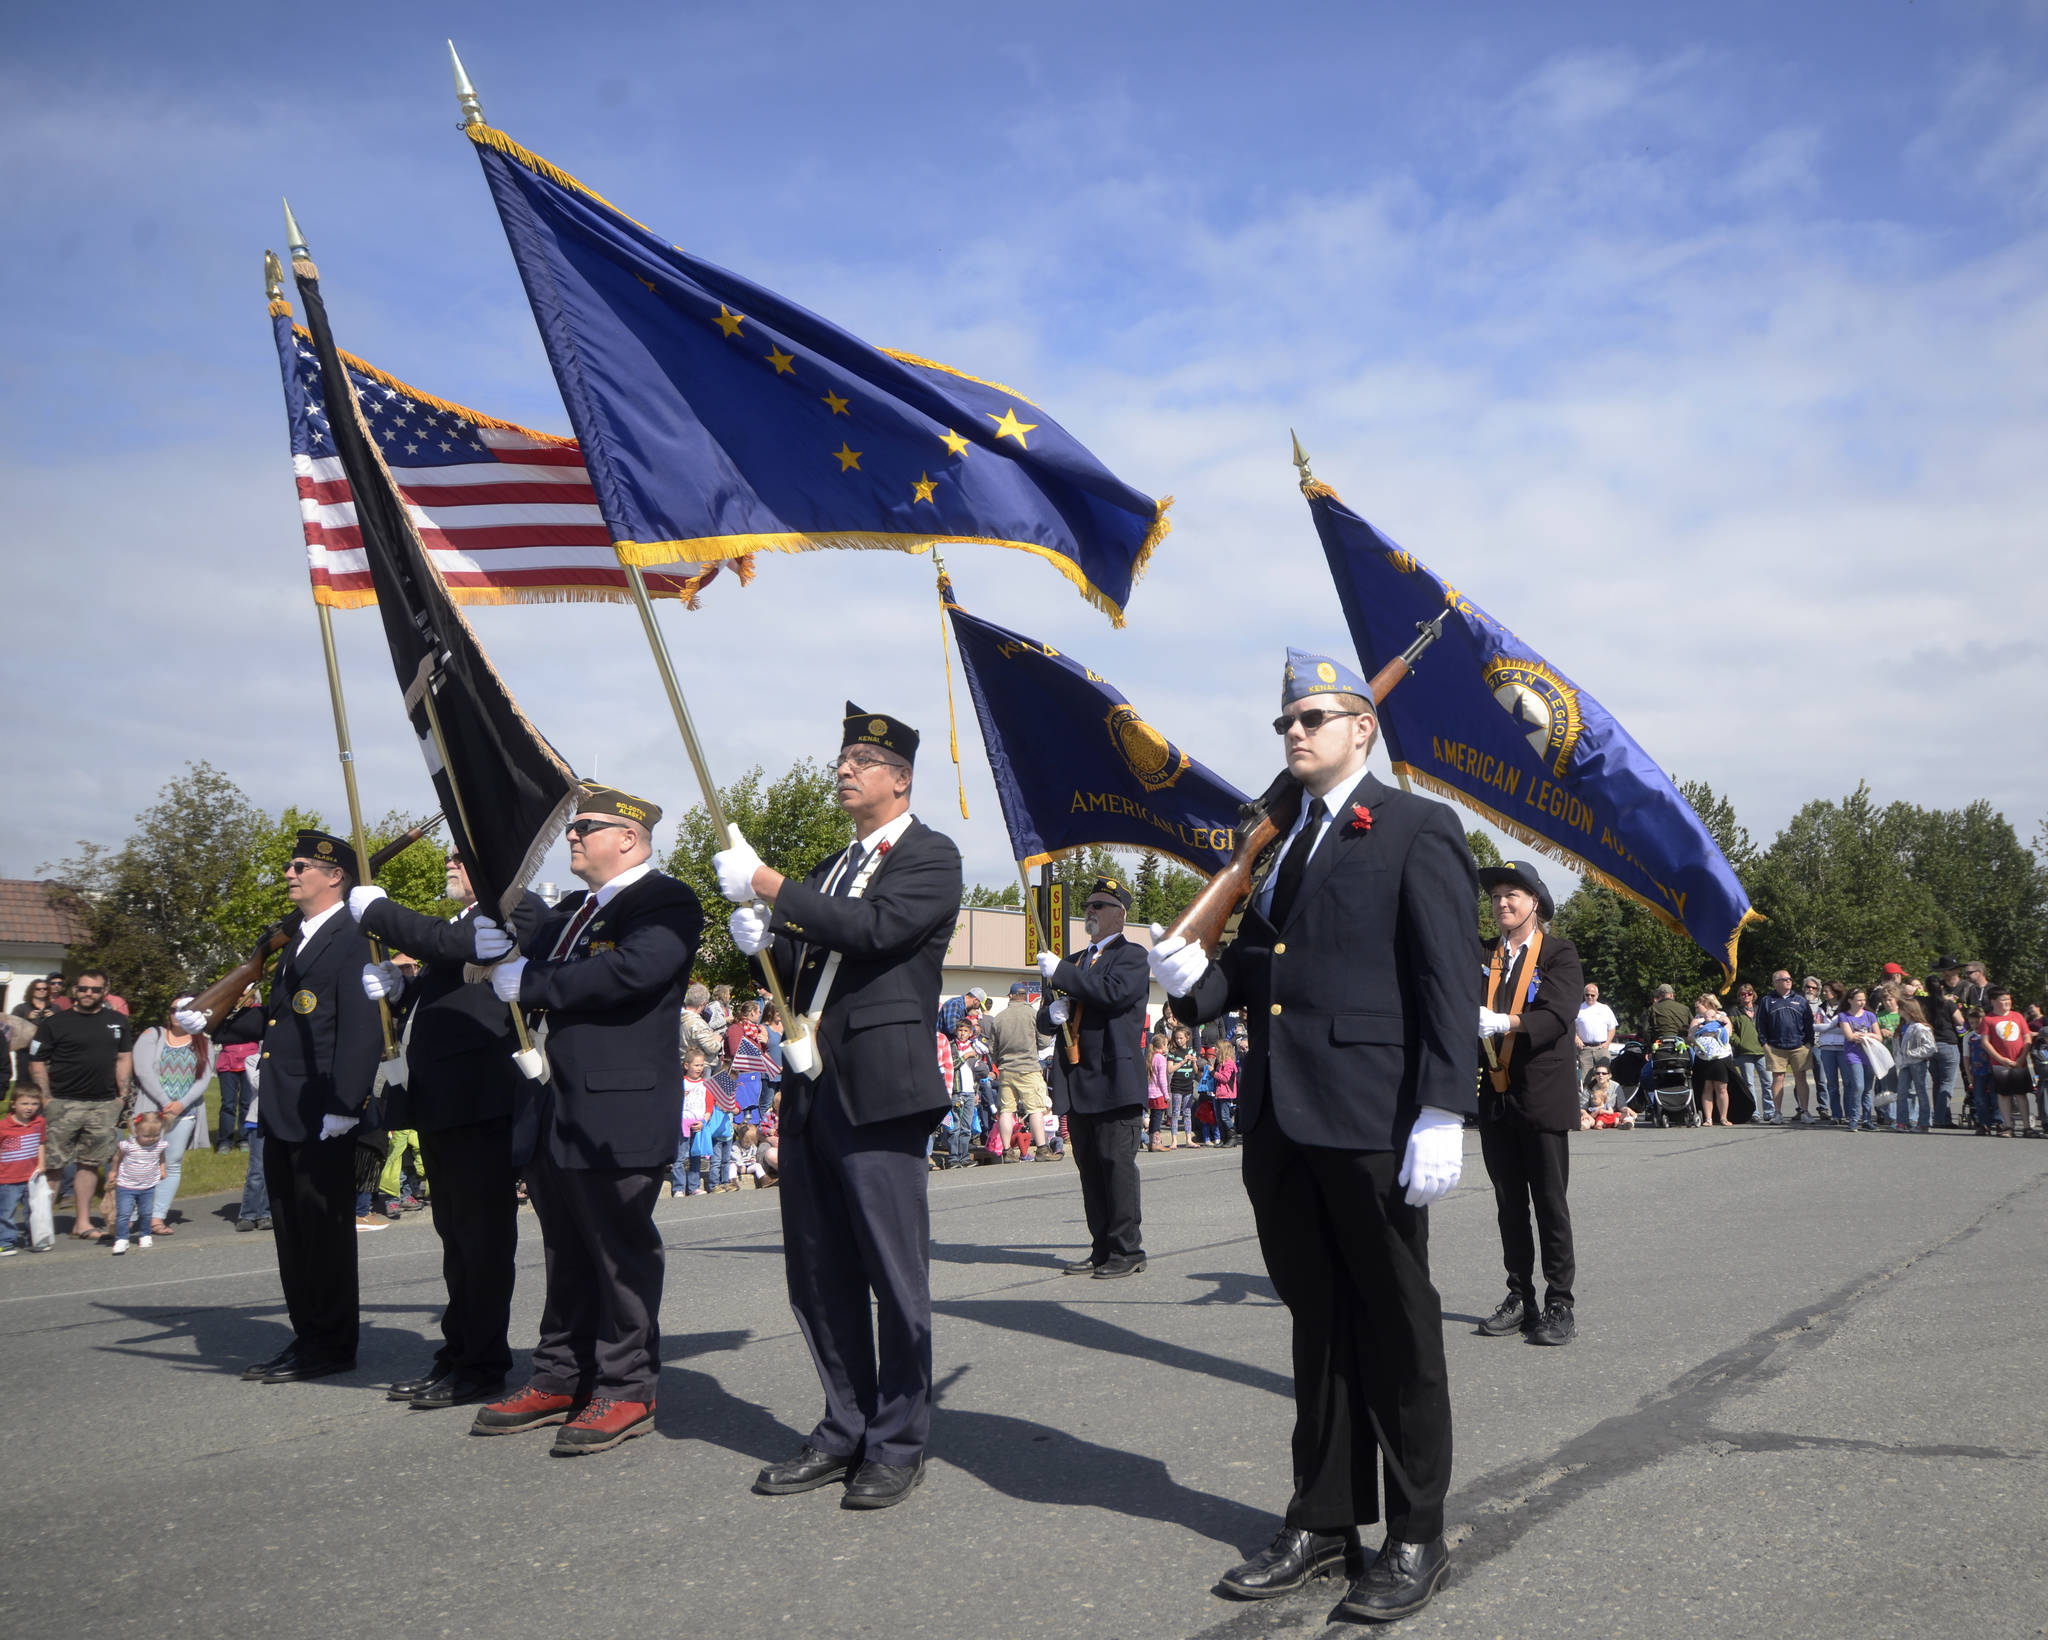 An American Legion color guard marches in the Fourth of July parade on Tuesday, July 4, 2017 in Kenai, Alaska. (Photo by Ben Boettger/Peninsula Clarion)                                An American Legion color guard marches in the Fourth of July parade on Tuesday, July 4, 2017 in Kenai, Alaska. (Photo by Ben Boettger/Peninsula Clarion, file)